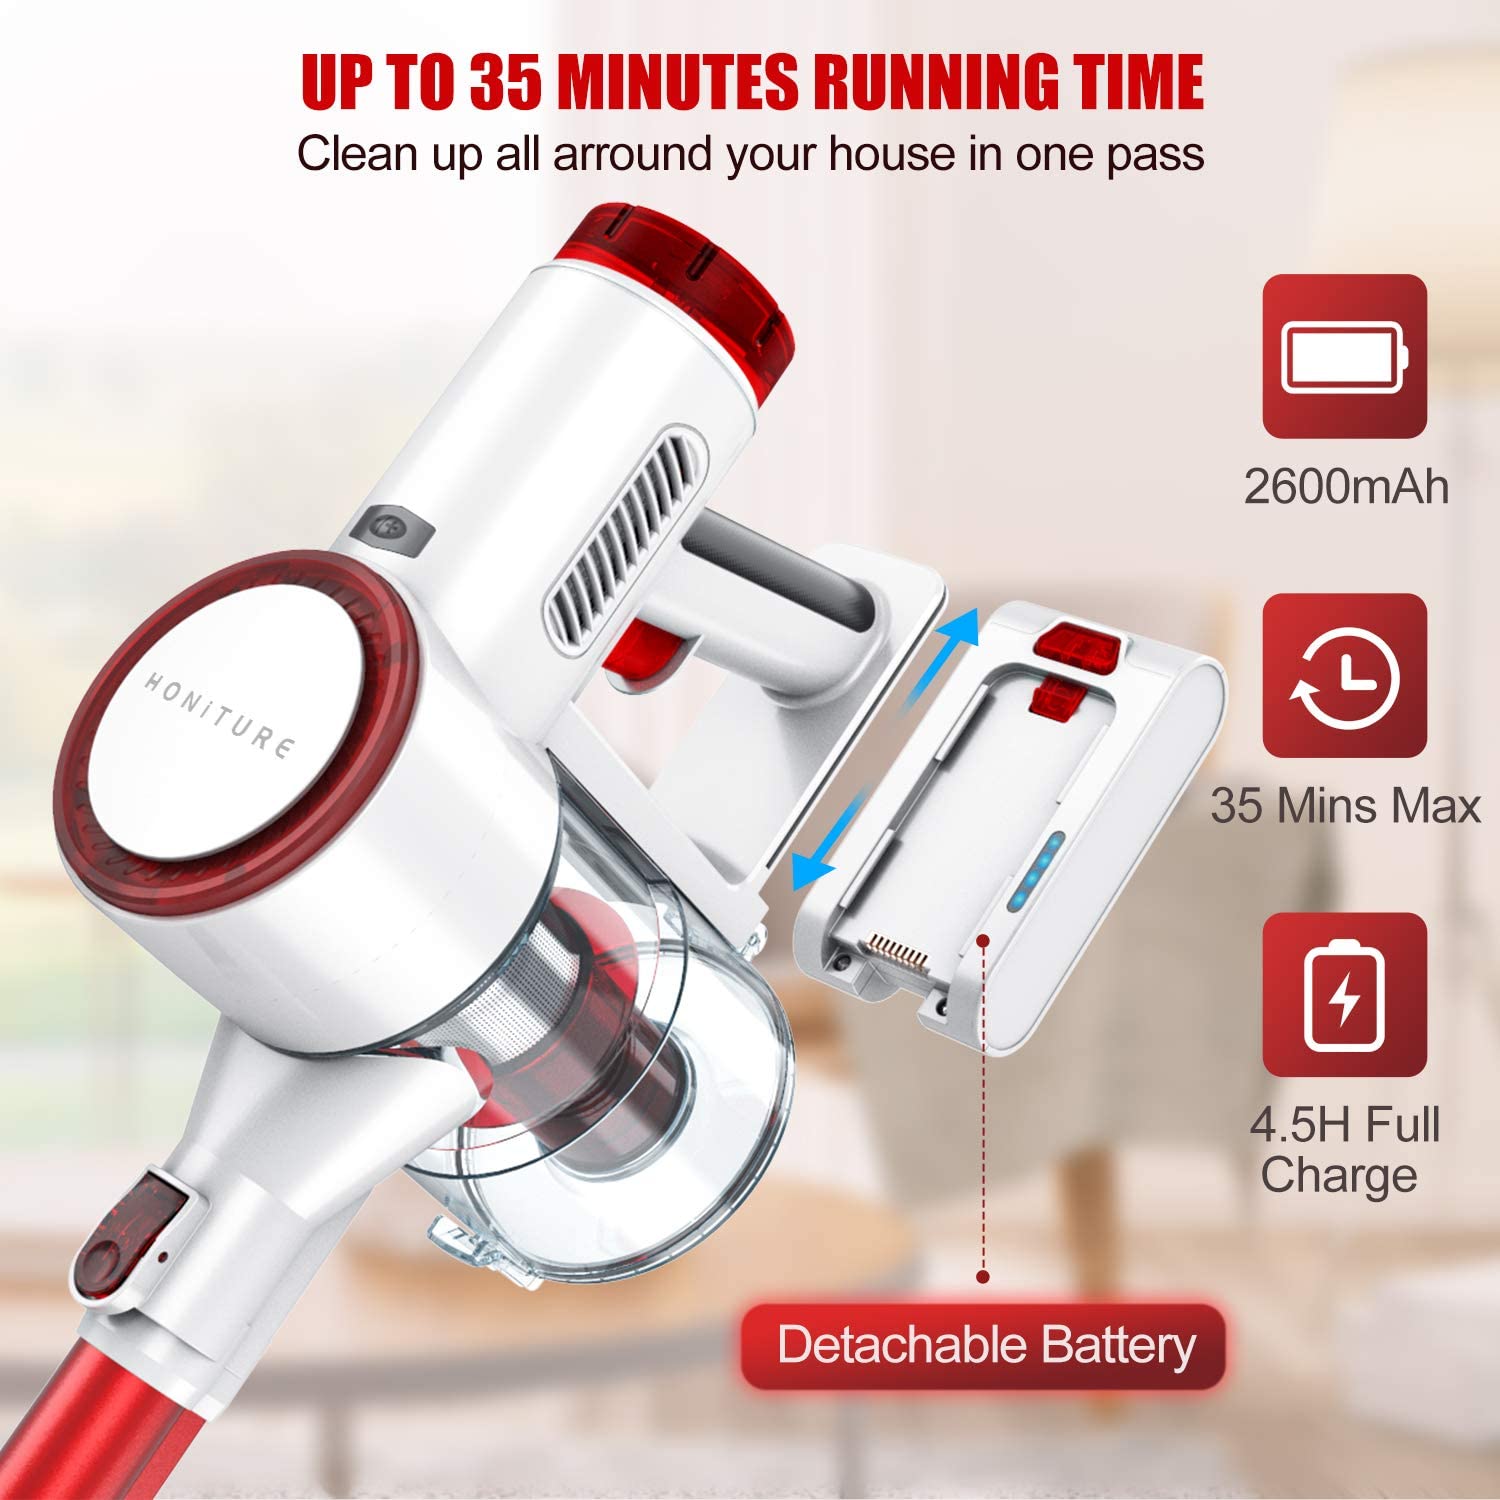 HONITURE 38Kpa Cordless Vacuum Cleaners Handheld Removable Battery 450W 55  Mins Wireless smart Home Appliance Touch Screen